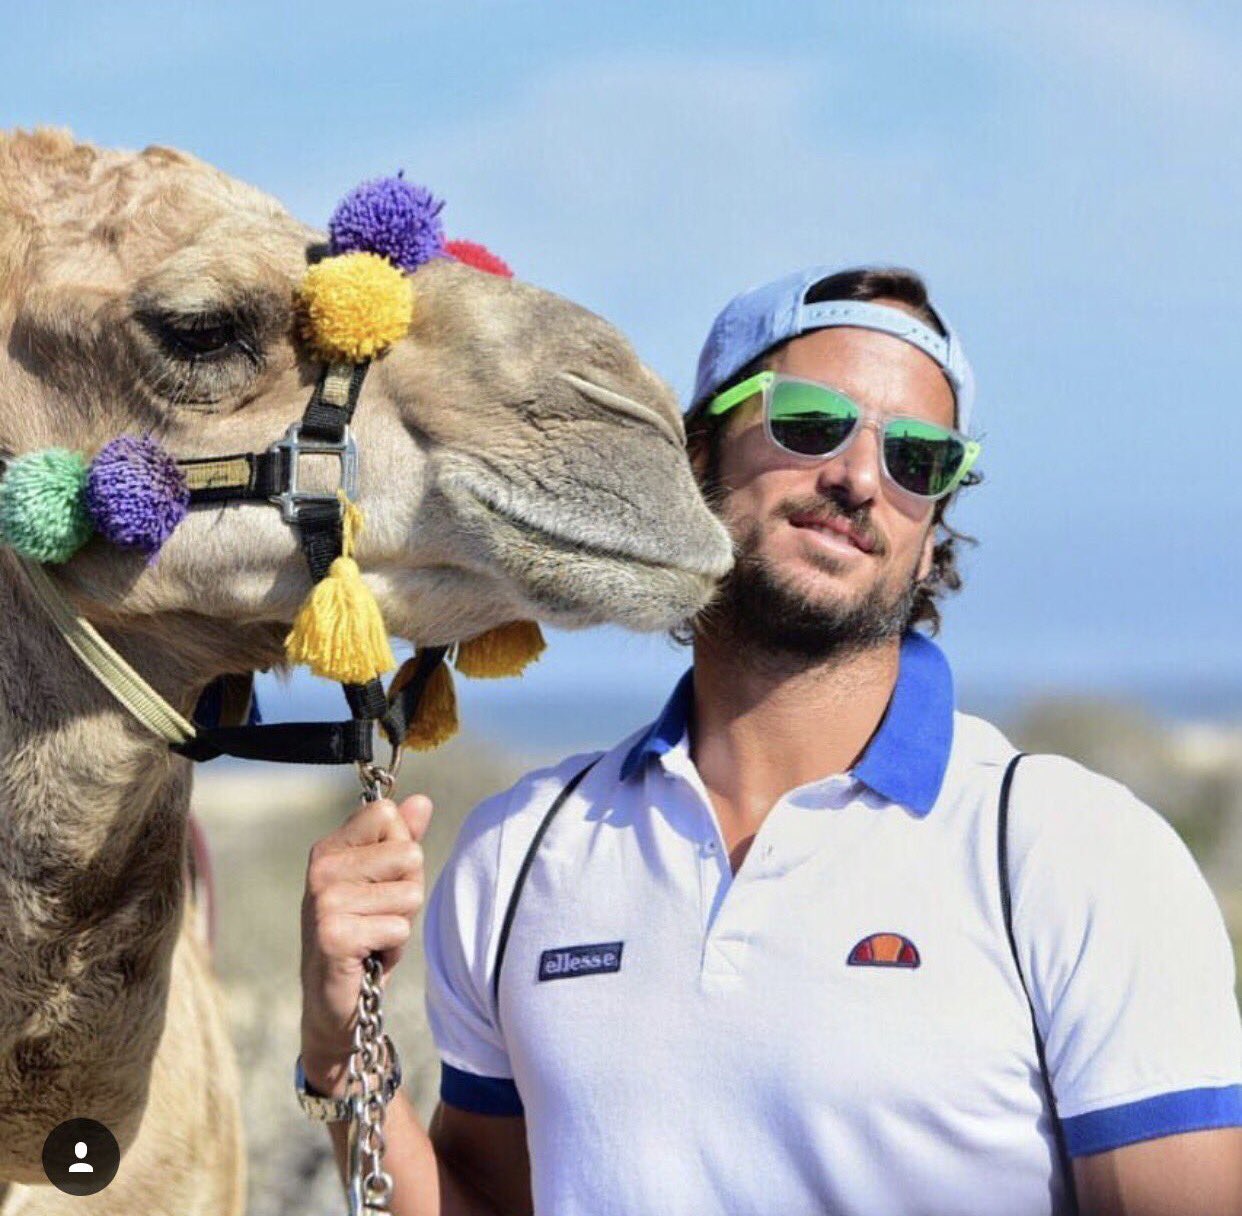  Happy Birthday from me and your camel friend!      